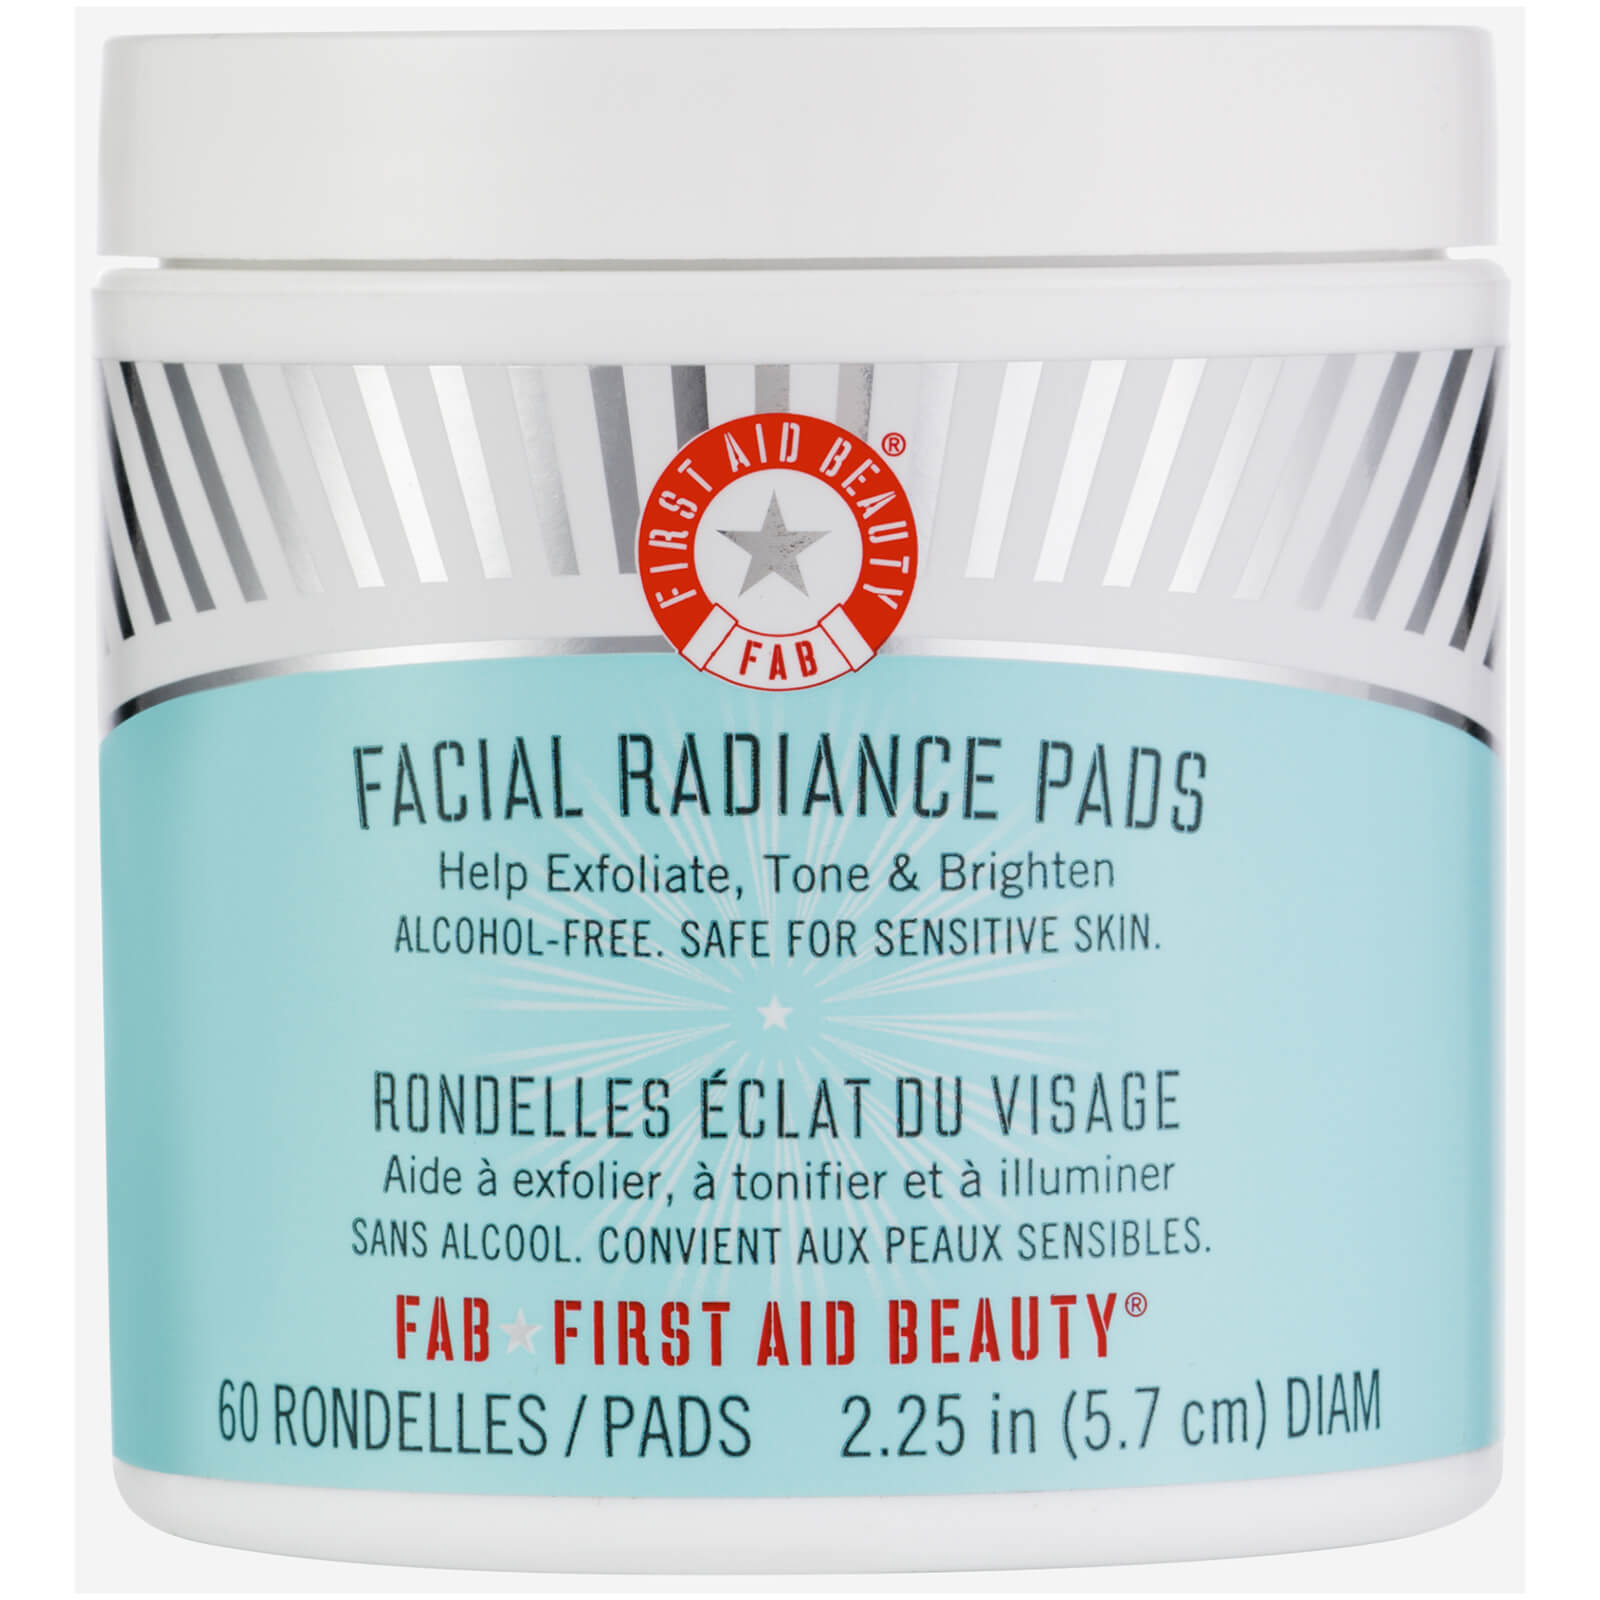 First Aid Beauty Facial Radiance Pads (60 Pads)